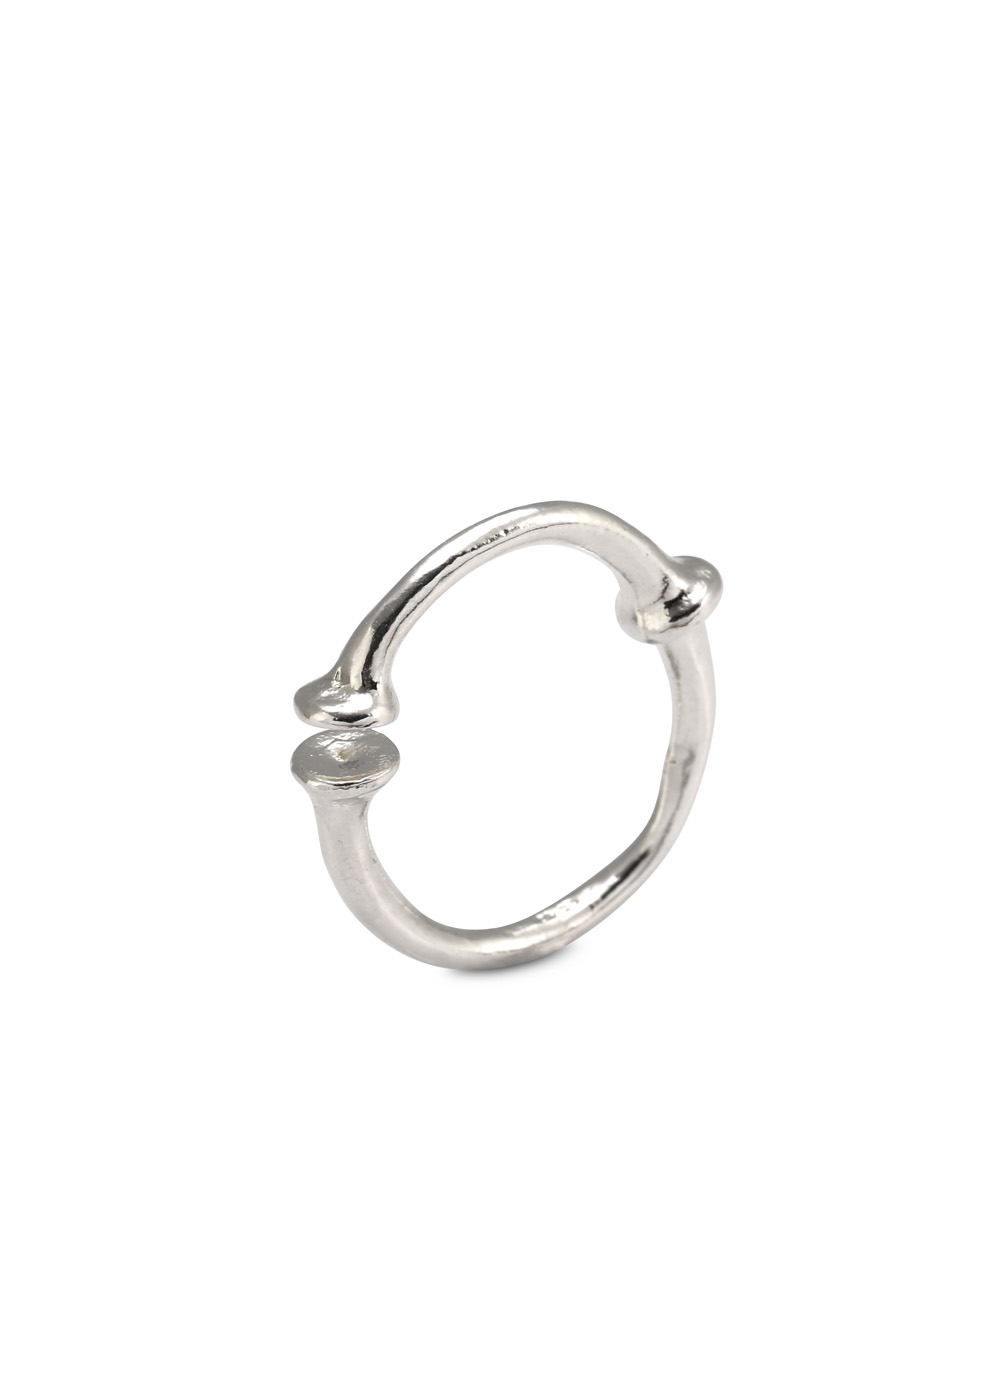 Daily Ring 01